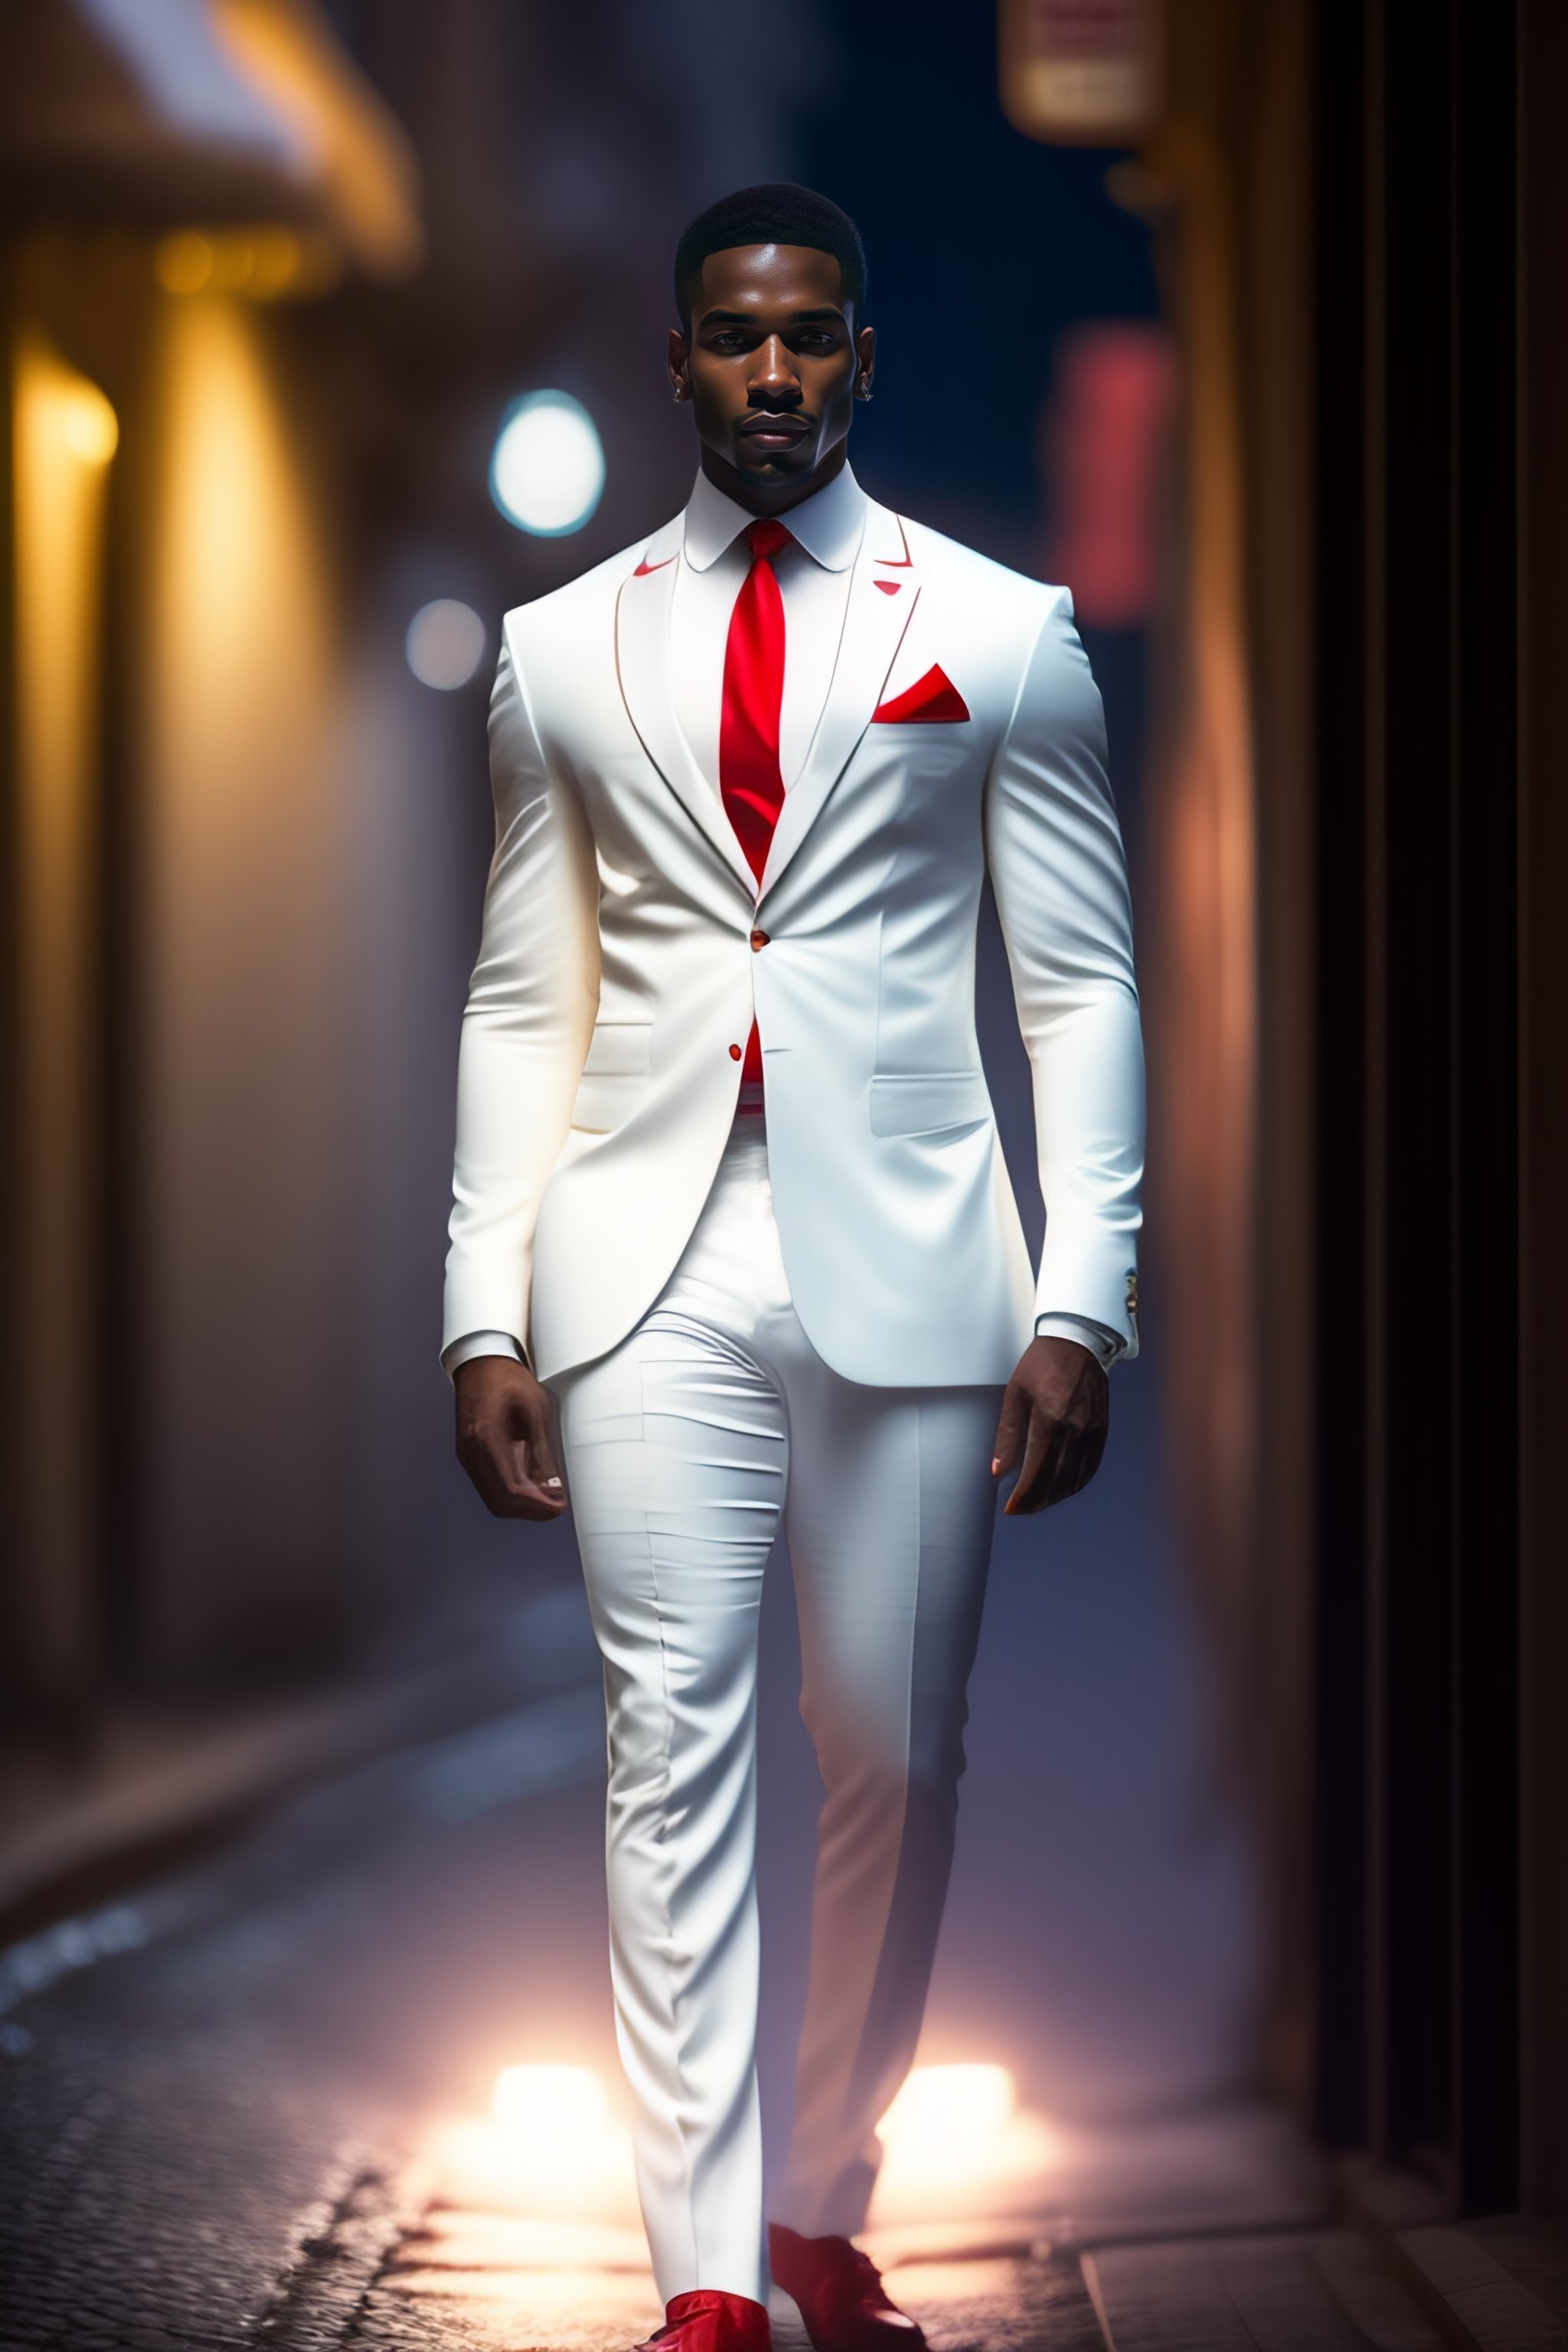 Vær tilfreds konkurs Oberst Lexica - Handsome black brazilian man wearing white suit and red tie,  wearing white hat, on street at night, in arcos da lapa rio de janeiro,  full bo...